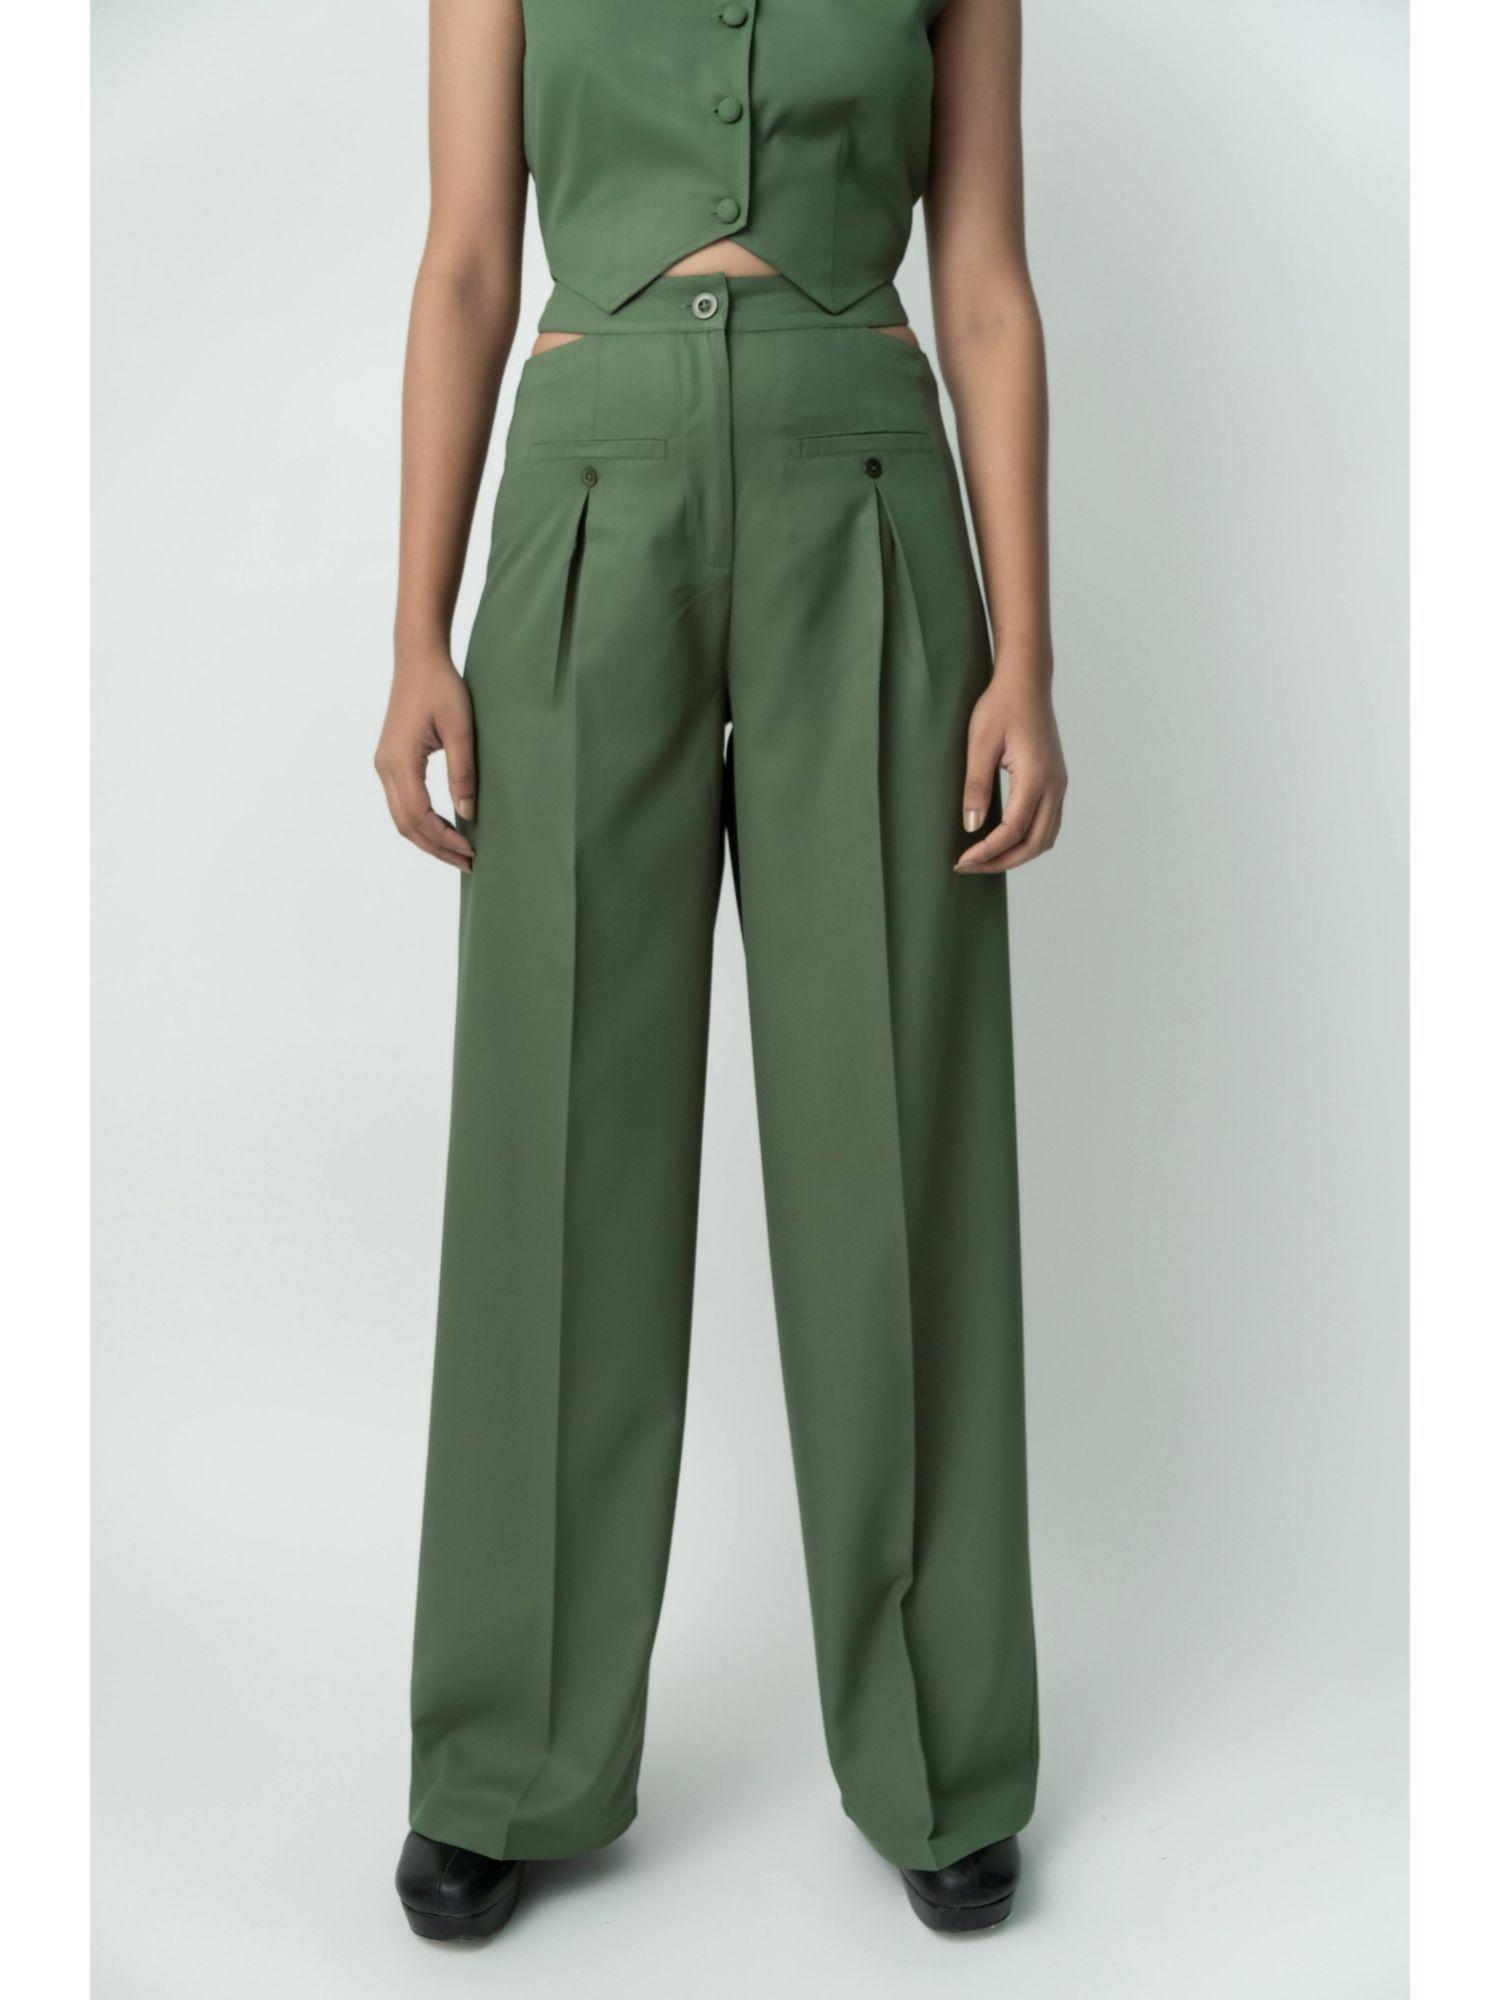 green-wide-leg-cut-out-trousers